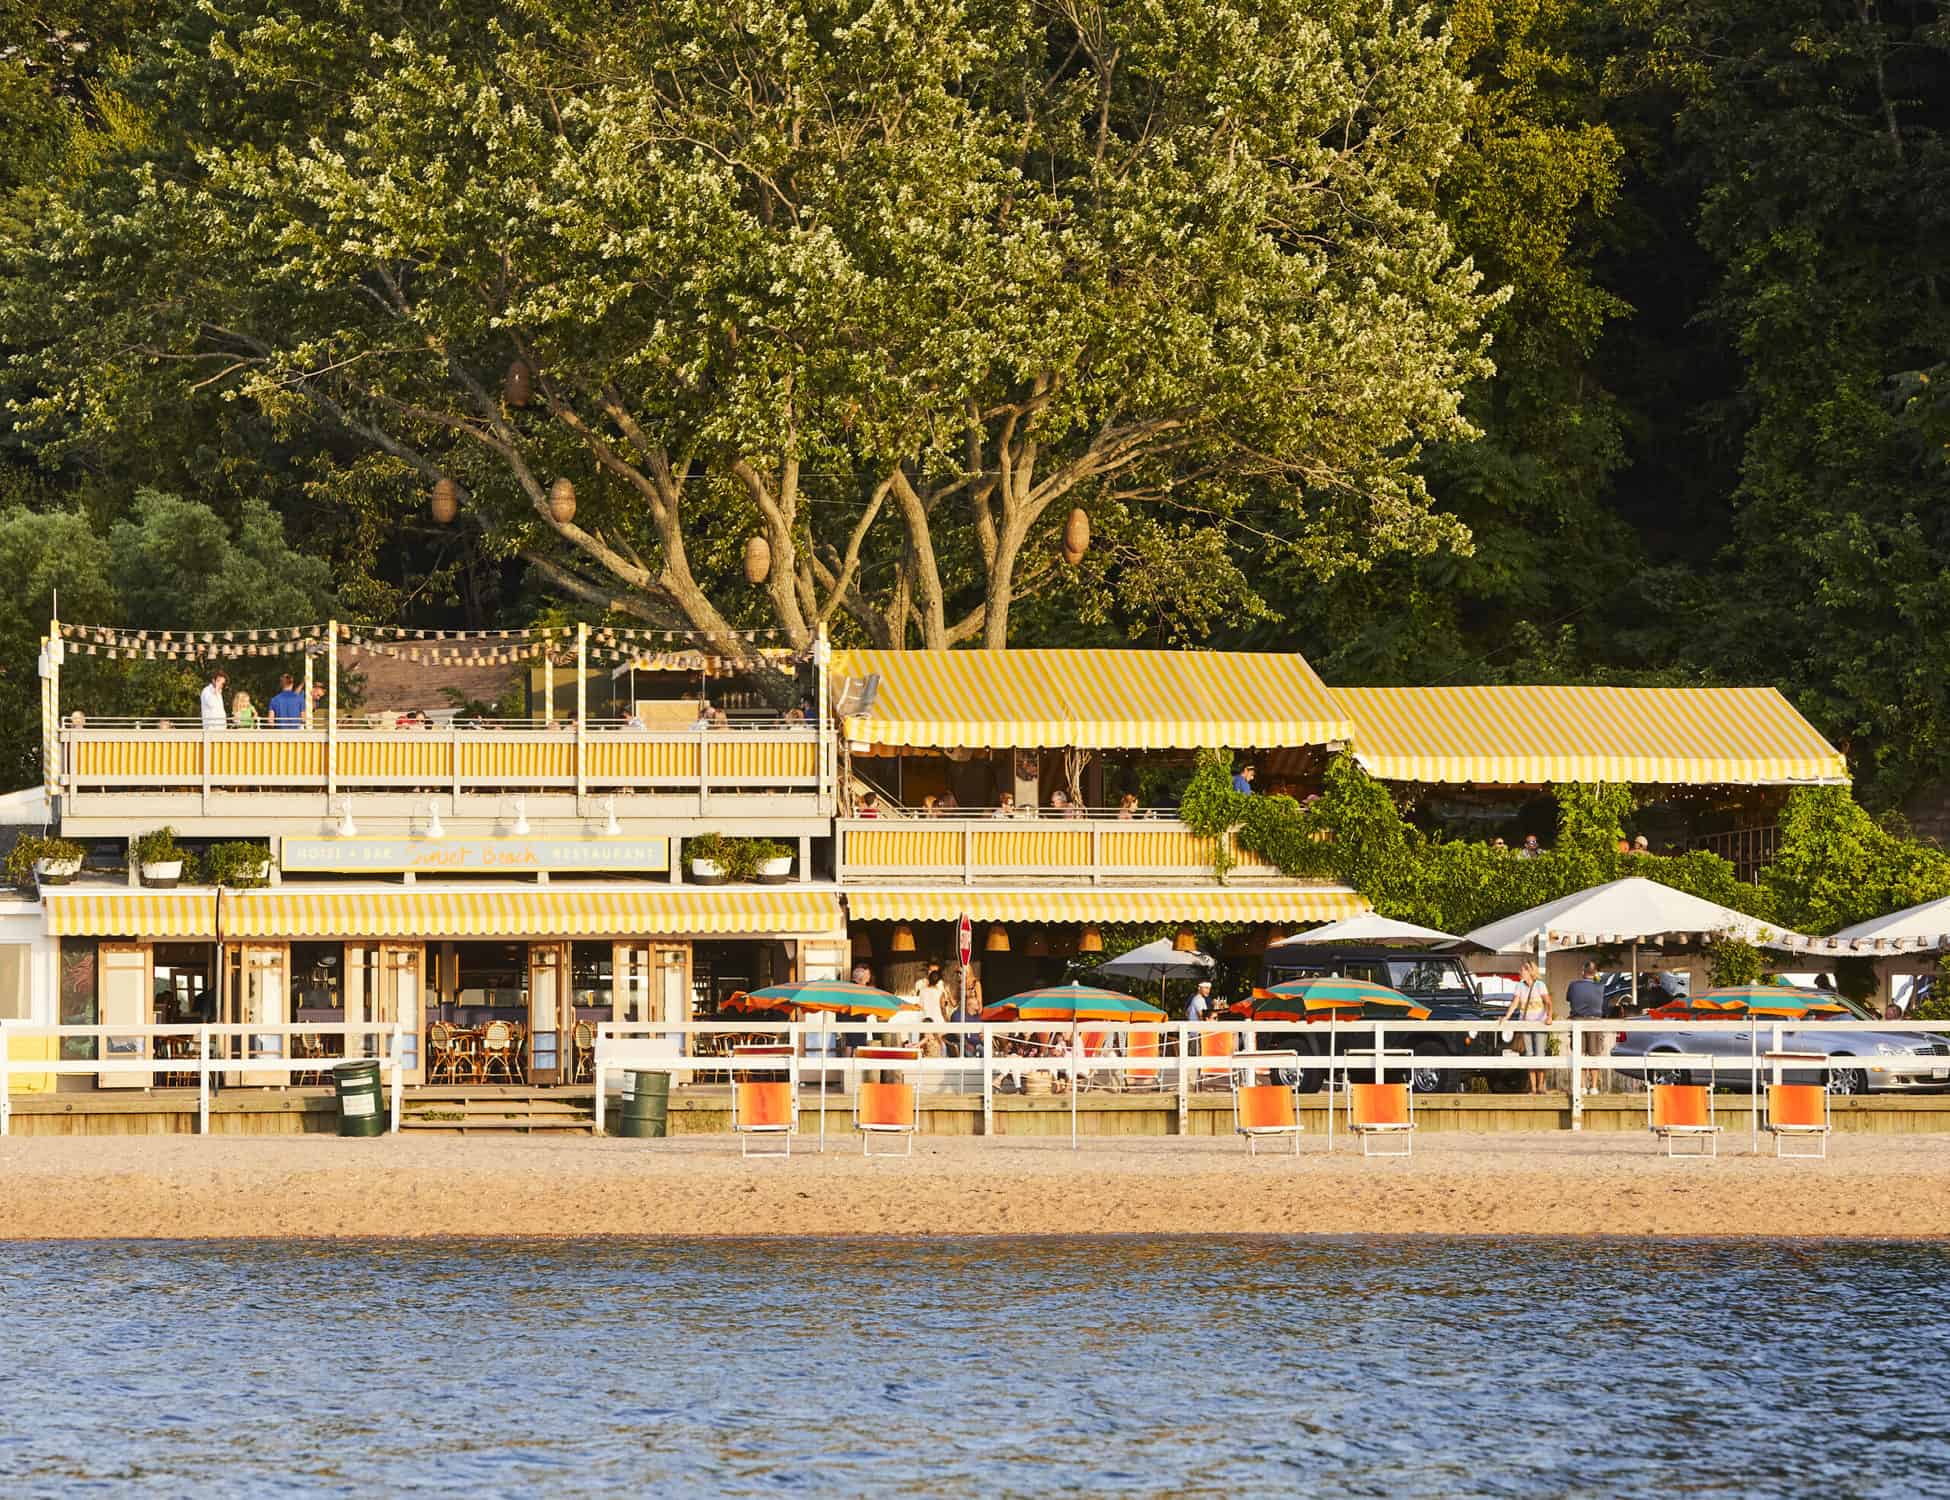 Yacht Hampton is your premier choice for waterfront dining at spots like sunset beach